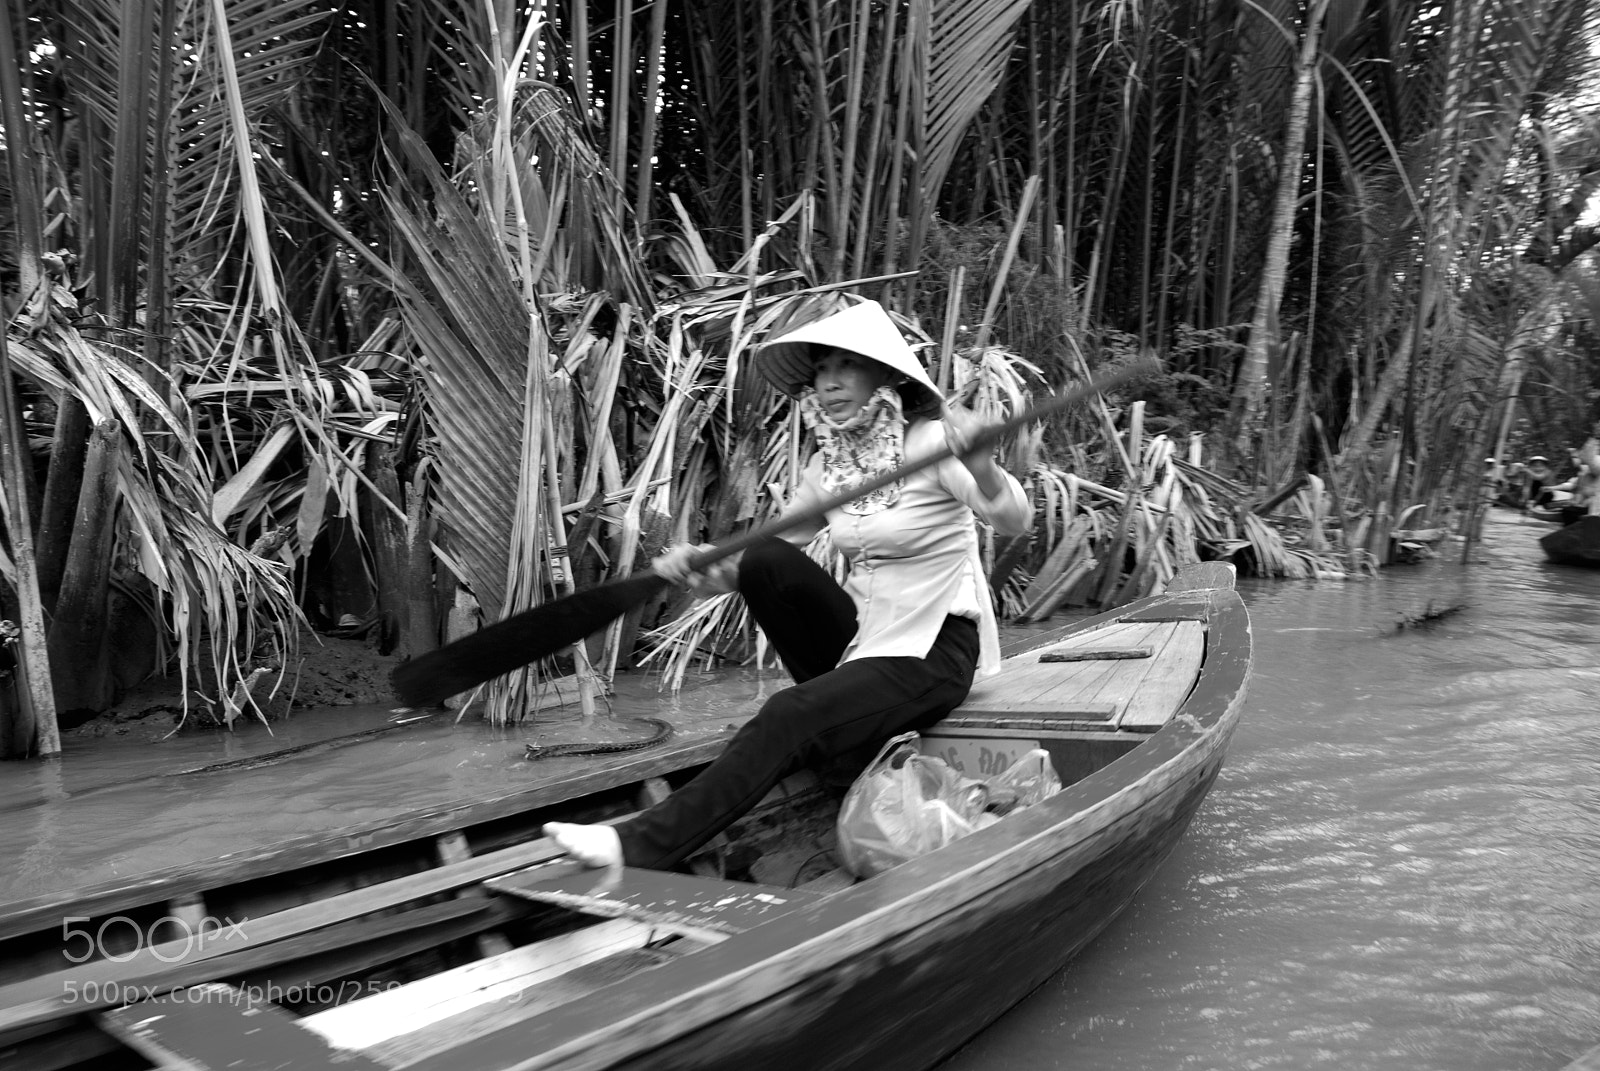 Nikon D80 sample photo. From mekong delta, with photography